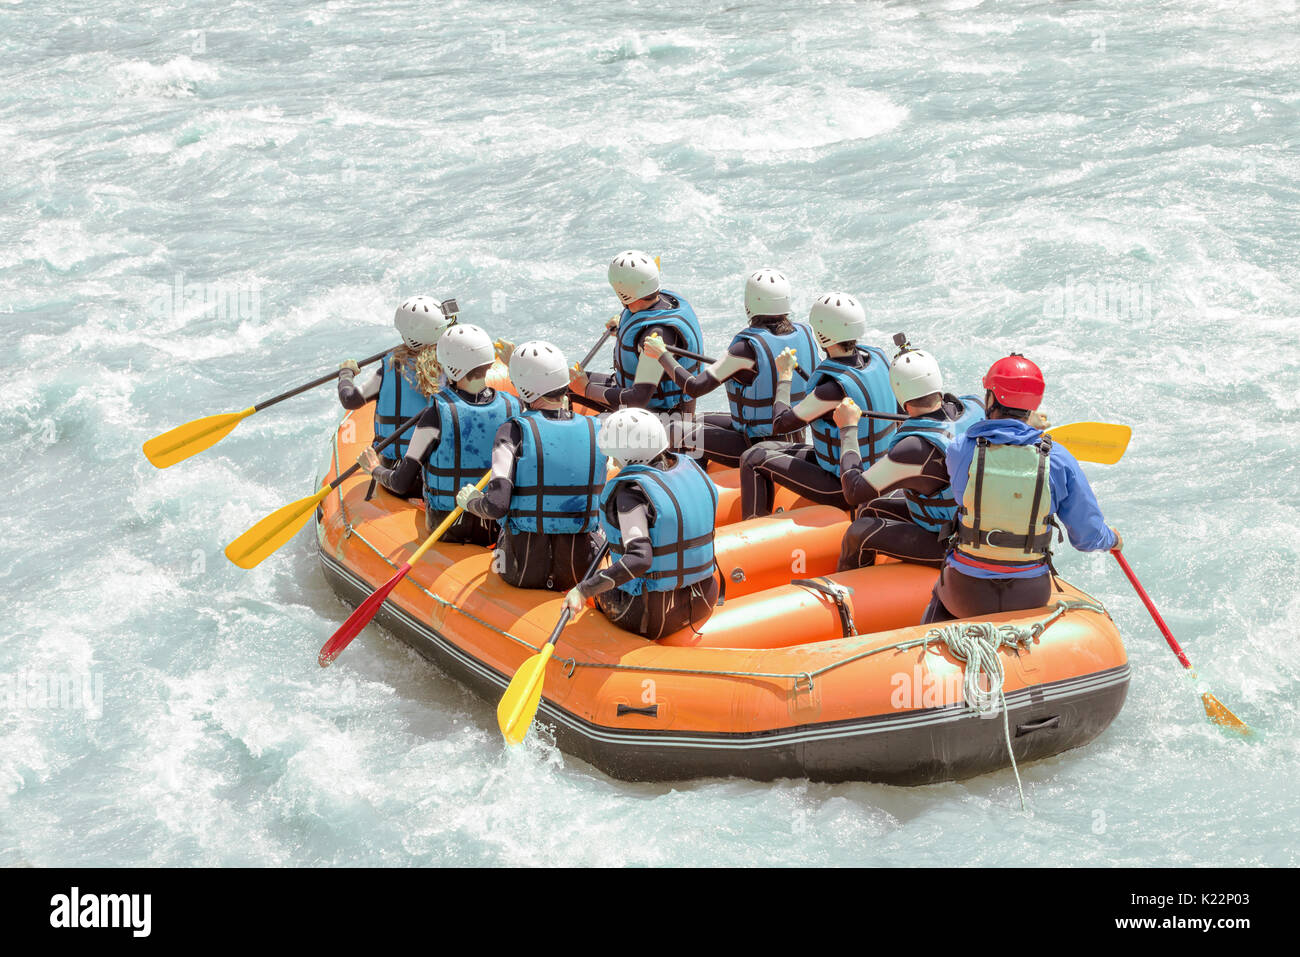 Group of people rafting on white water, active vacations, team concept Stock Photo